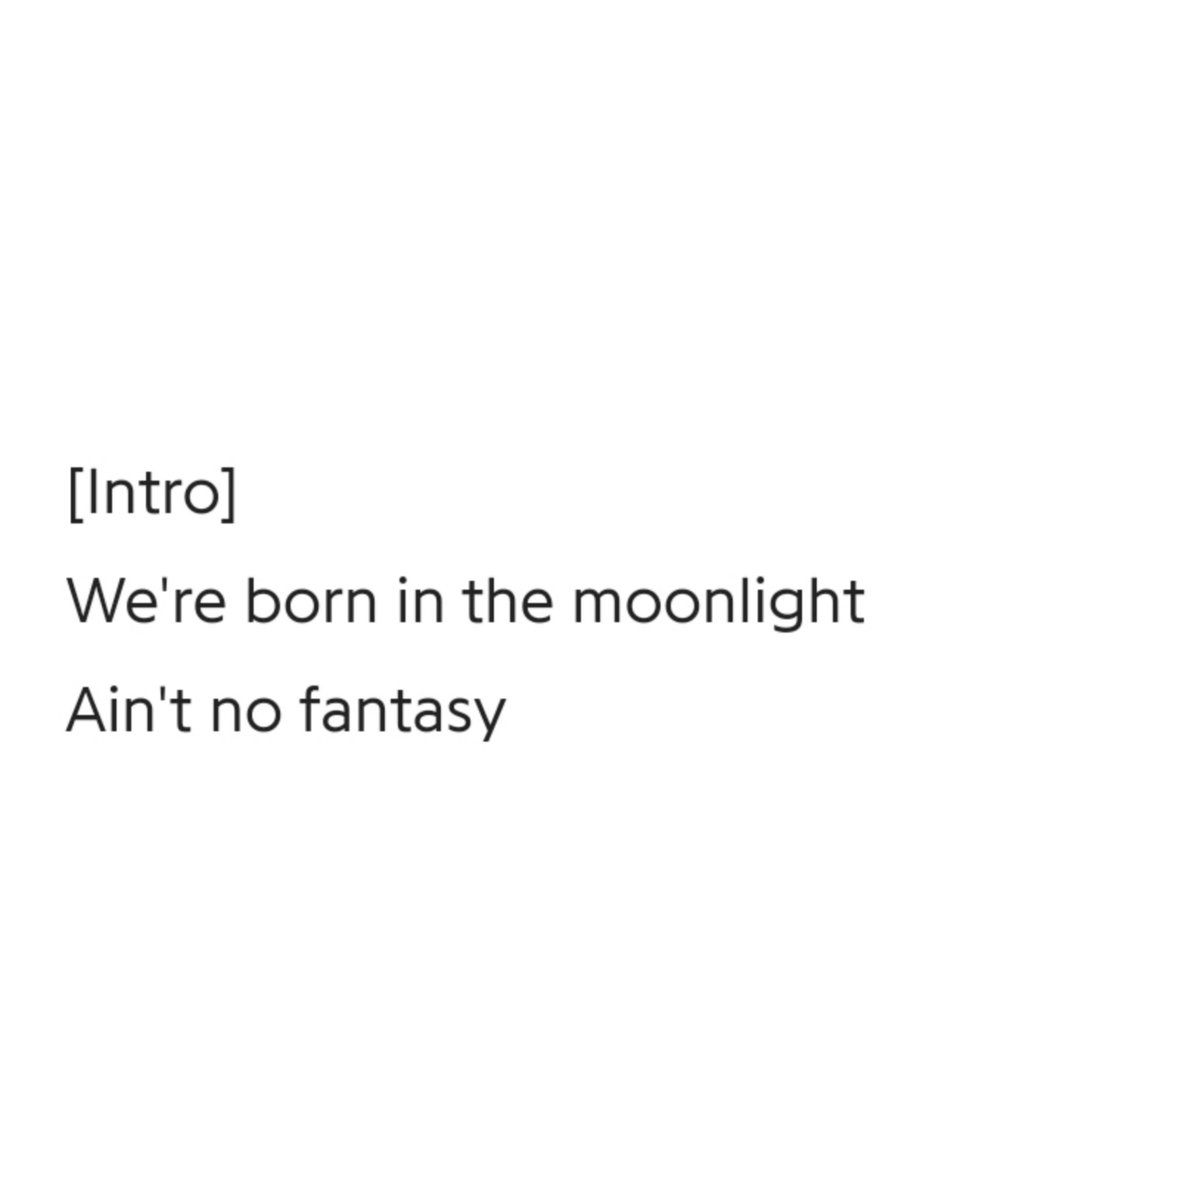 Tranquility n comfort in the moon hours, when he could be 'himself' under the "moonlight", which essentially refers to one's innermost true self. Joon opens the song w "We're born in the moonlight, ain't no fantasy": it is an unnoticed fact that the most distressful times+